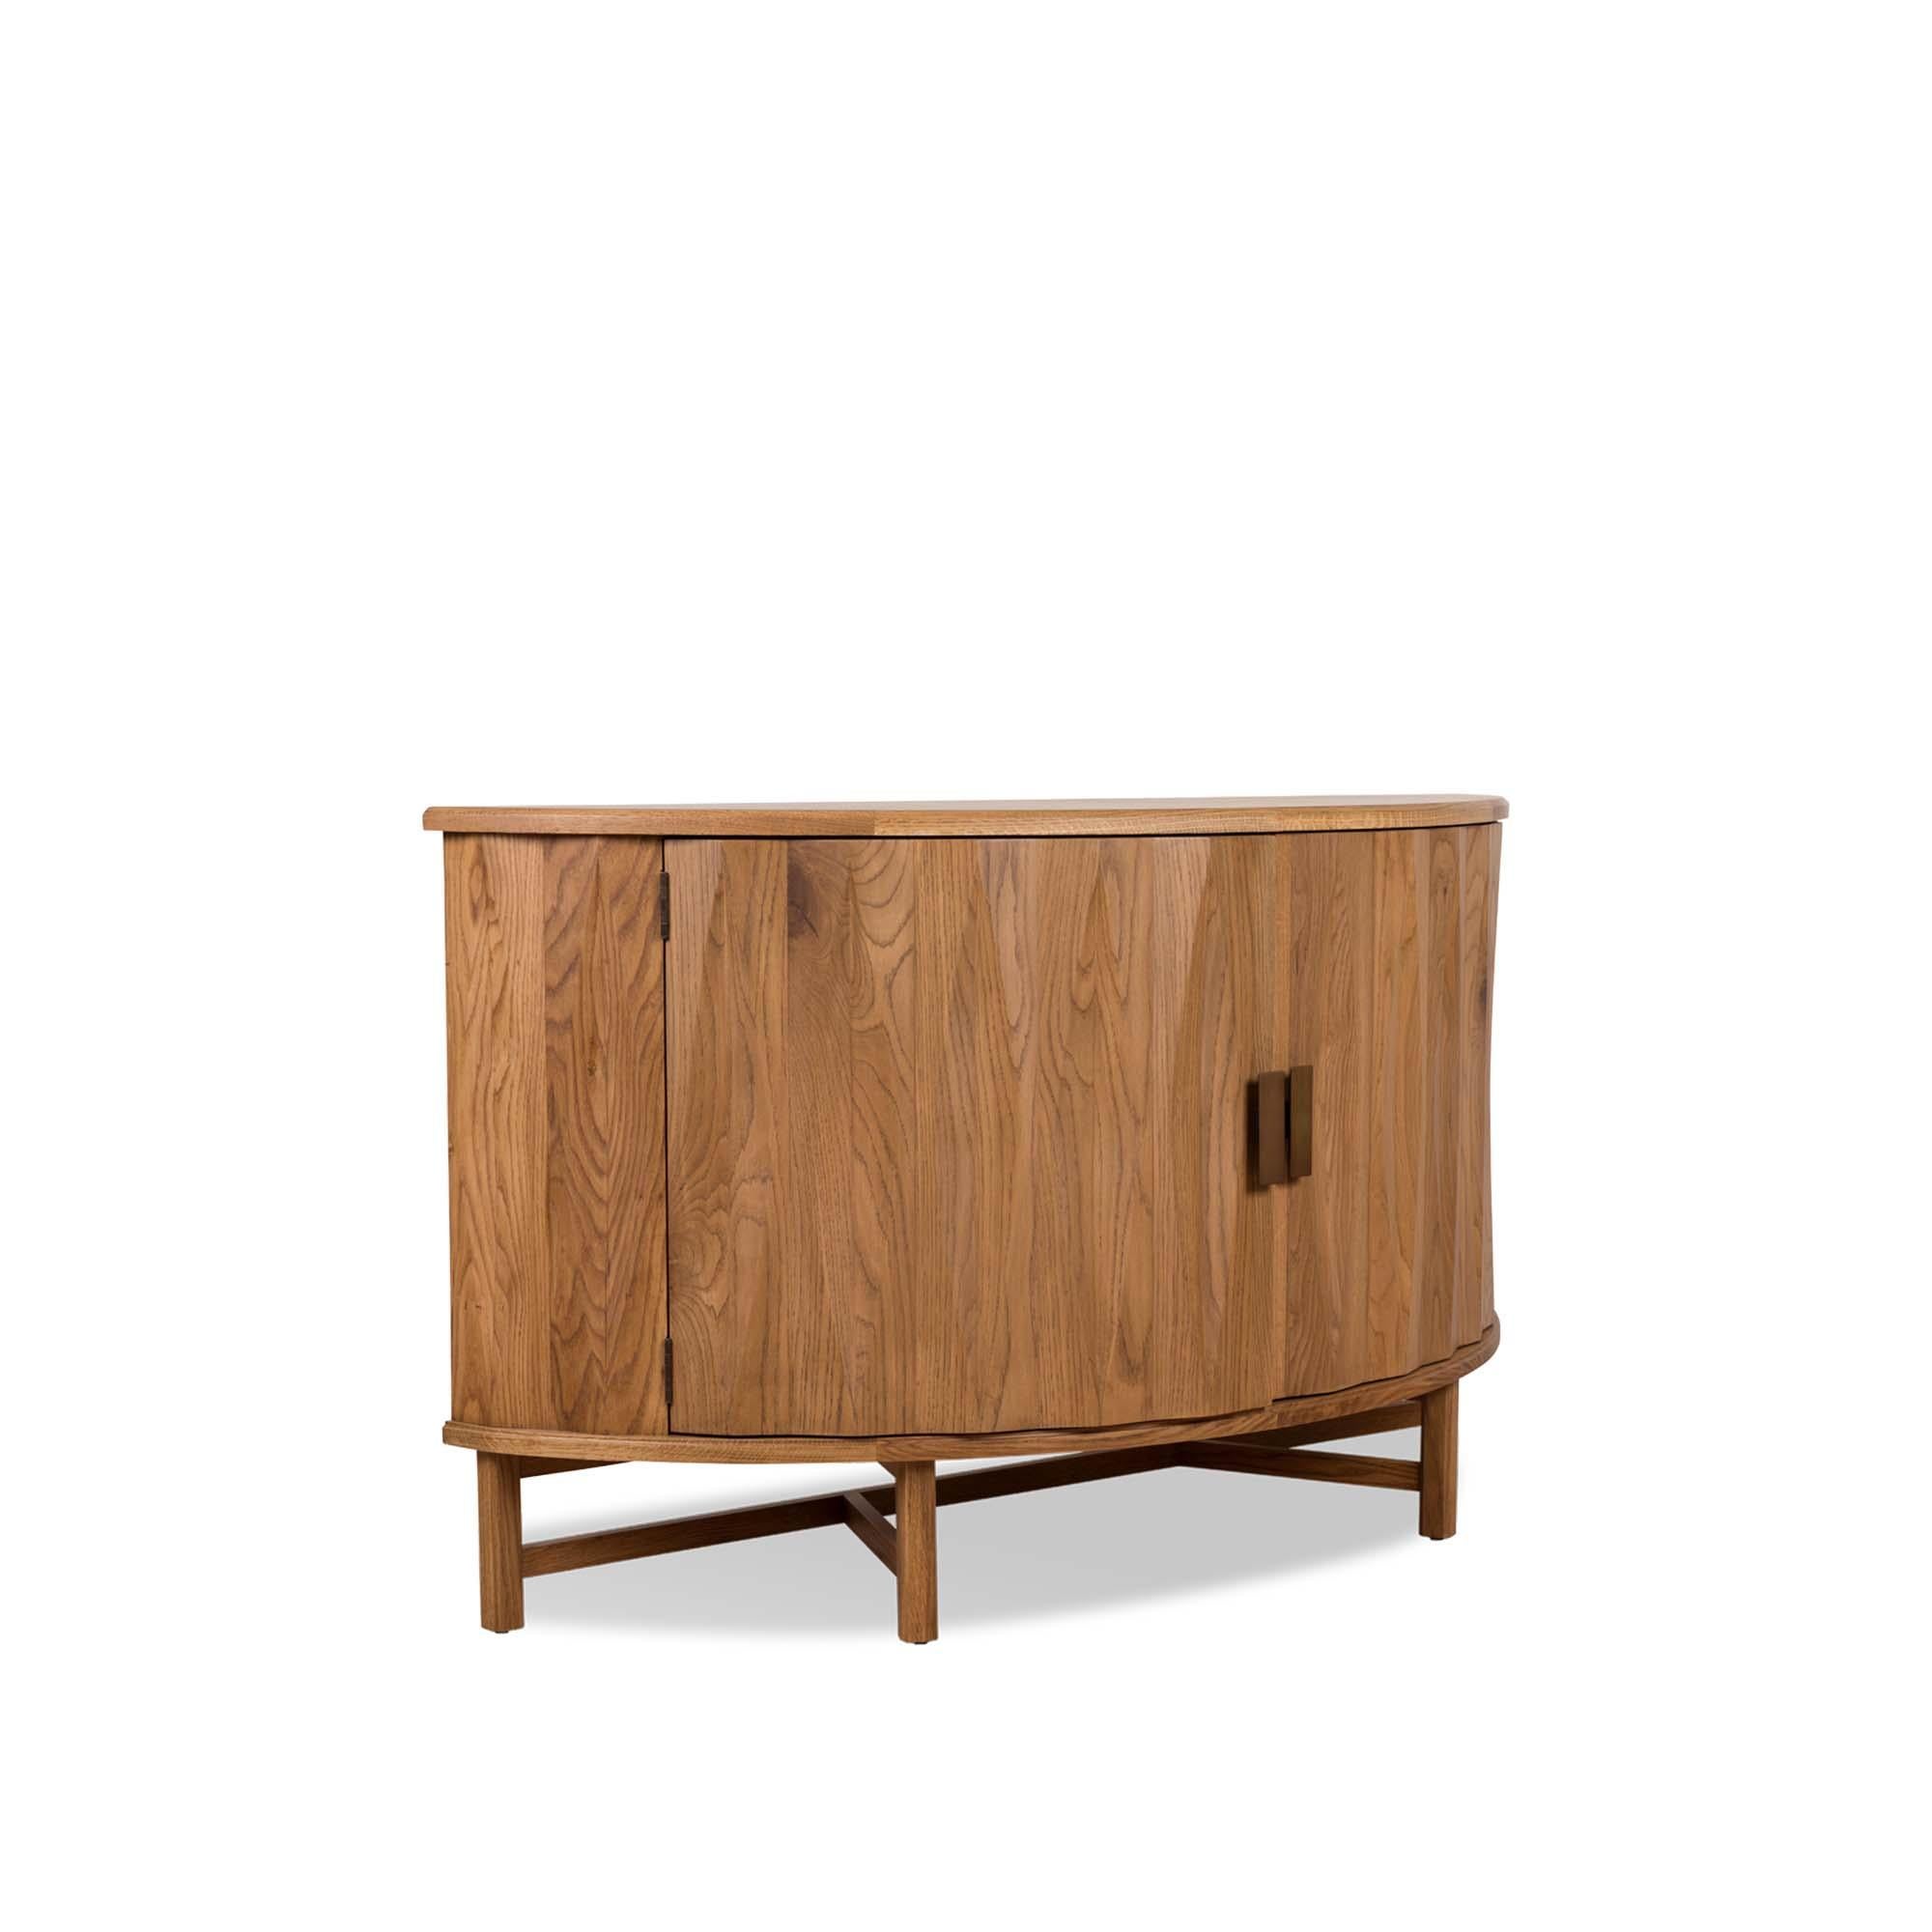 The Griffin console features a demilune shaped case with parquet doors, brass hardware and a sculptural wood base. Available in American walnut or white oak. 

The Lawson-Fenning Collection is designed and handmade in Los Angeles, California.